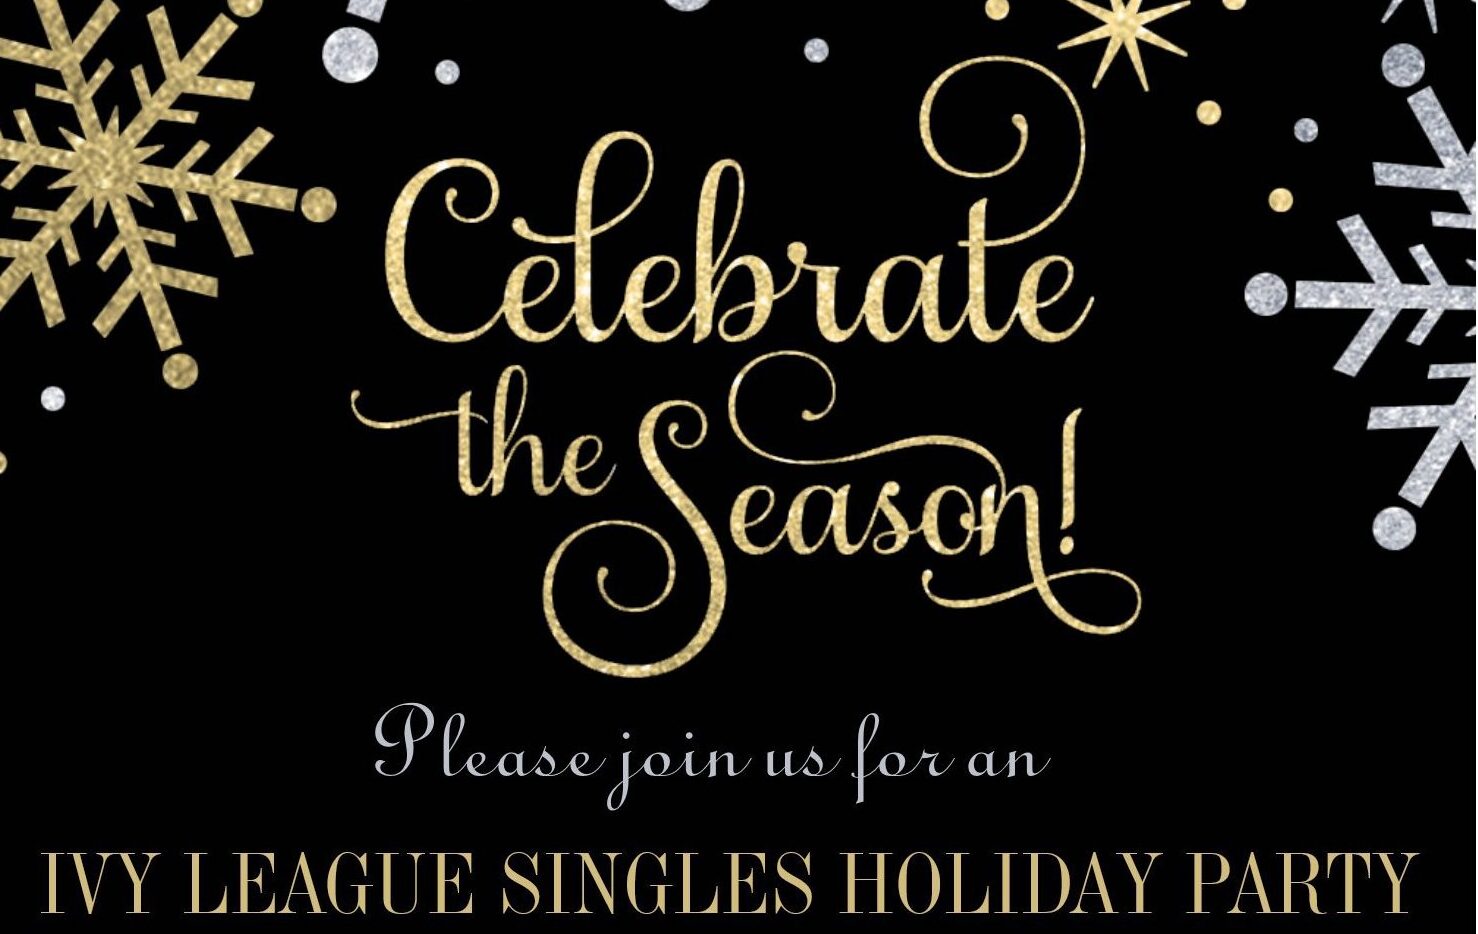 Ivy League Singles Holiday Party